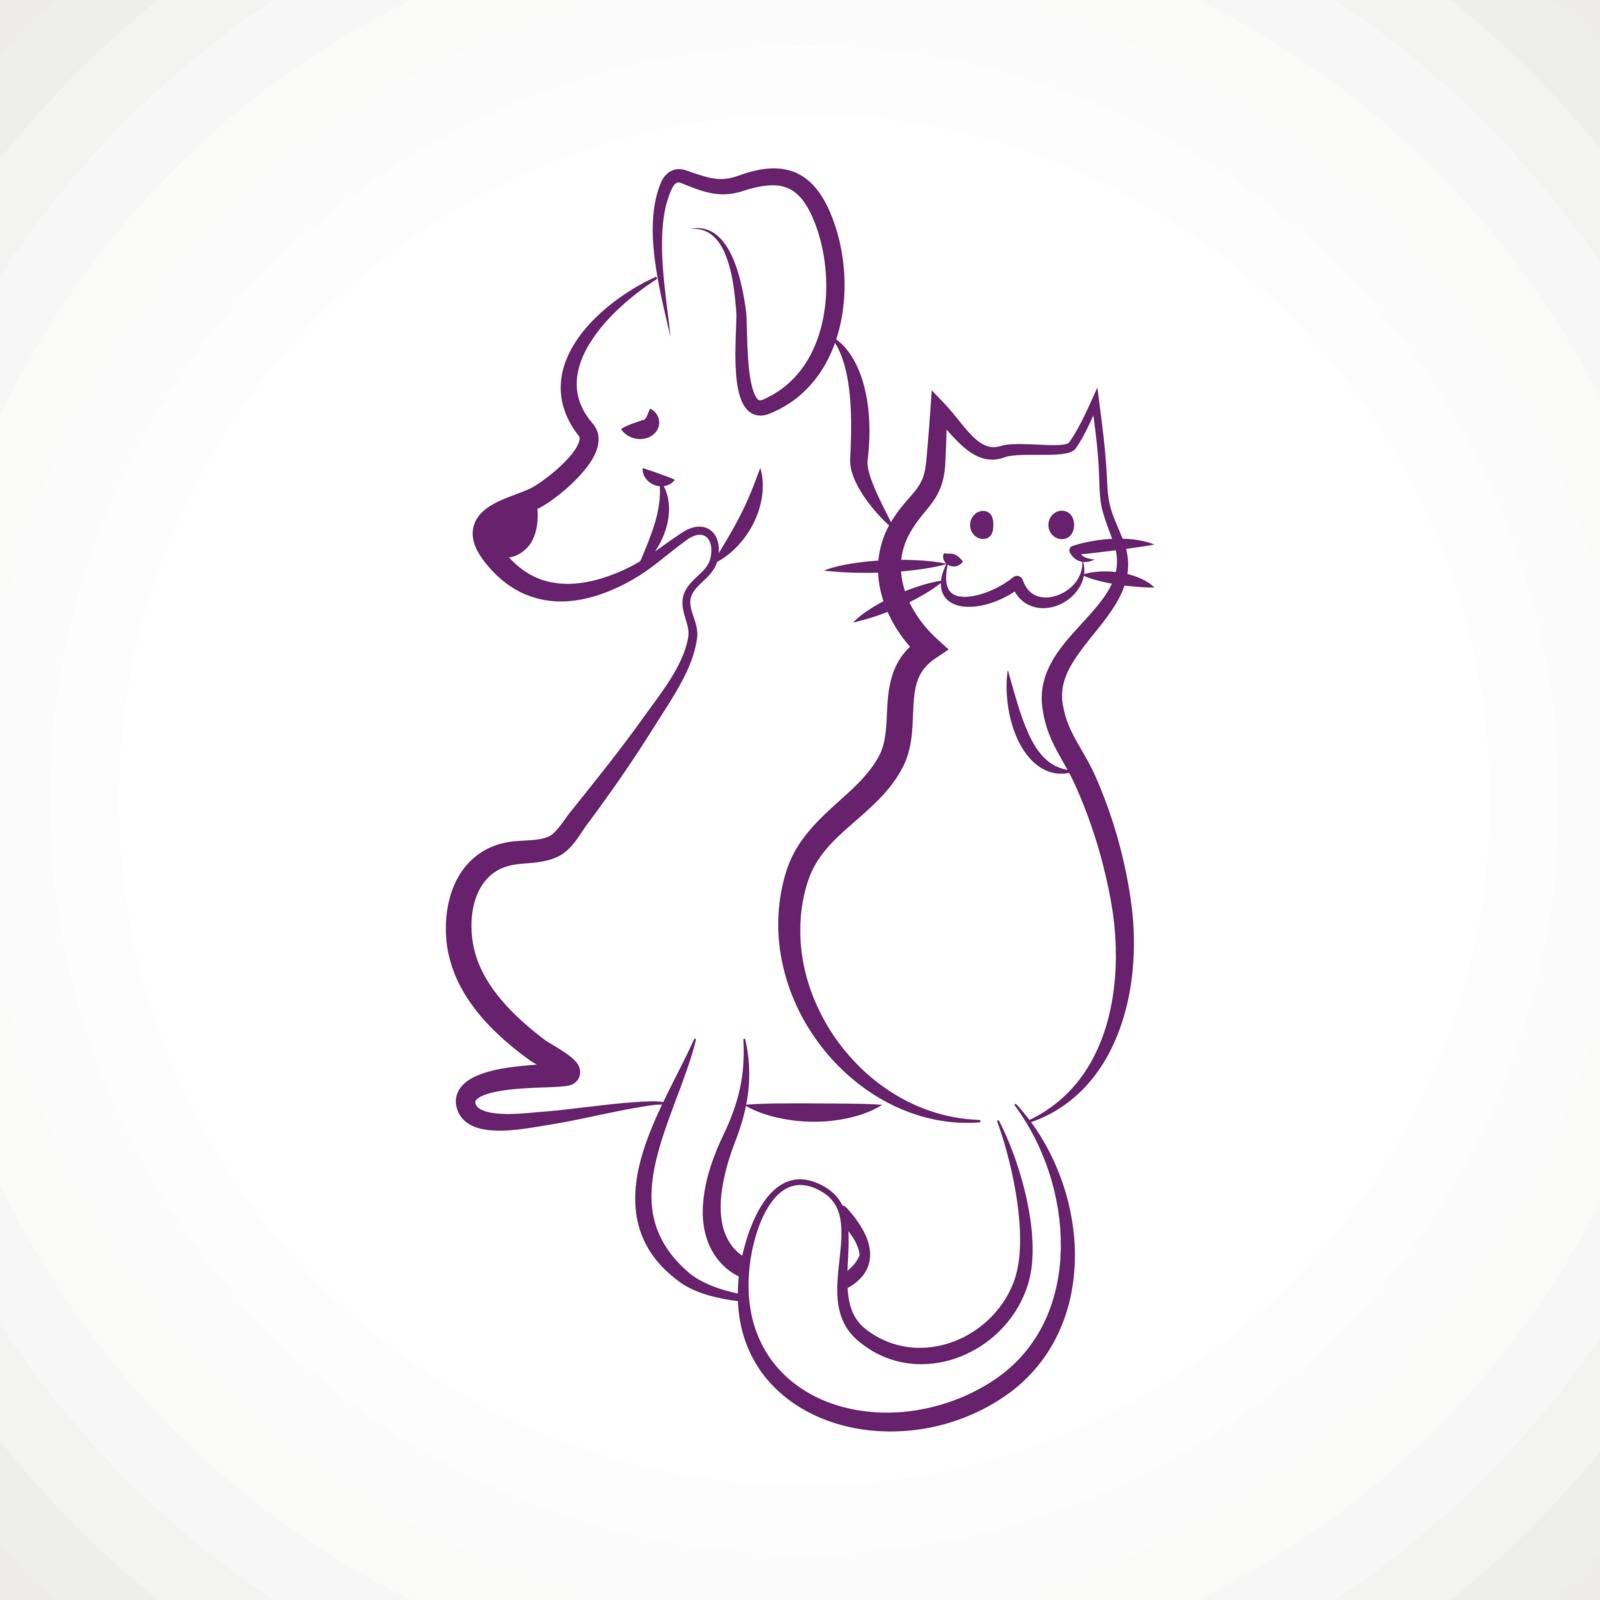 Sketchy cat and dog by Coline